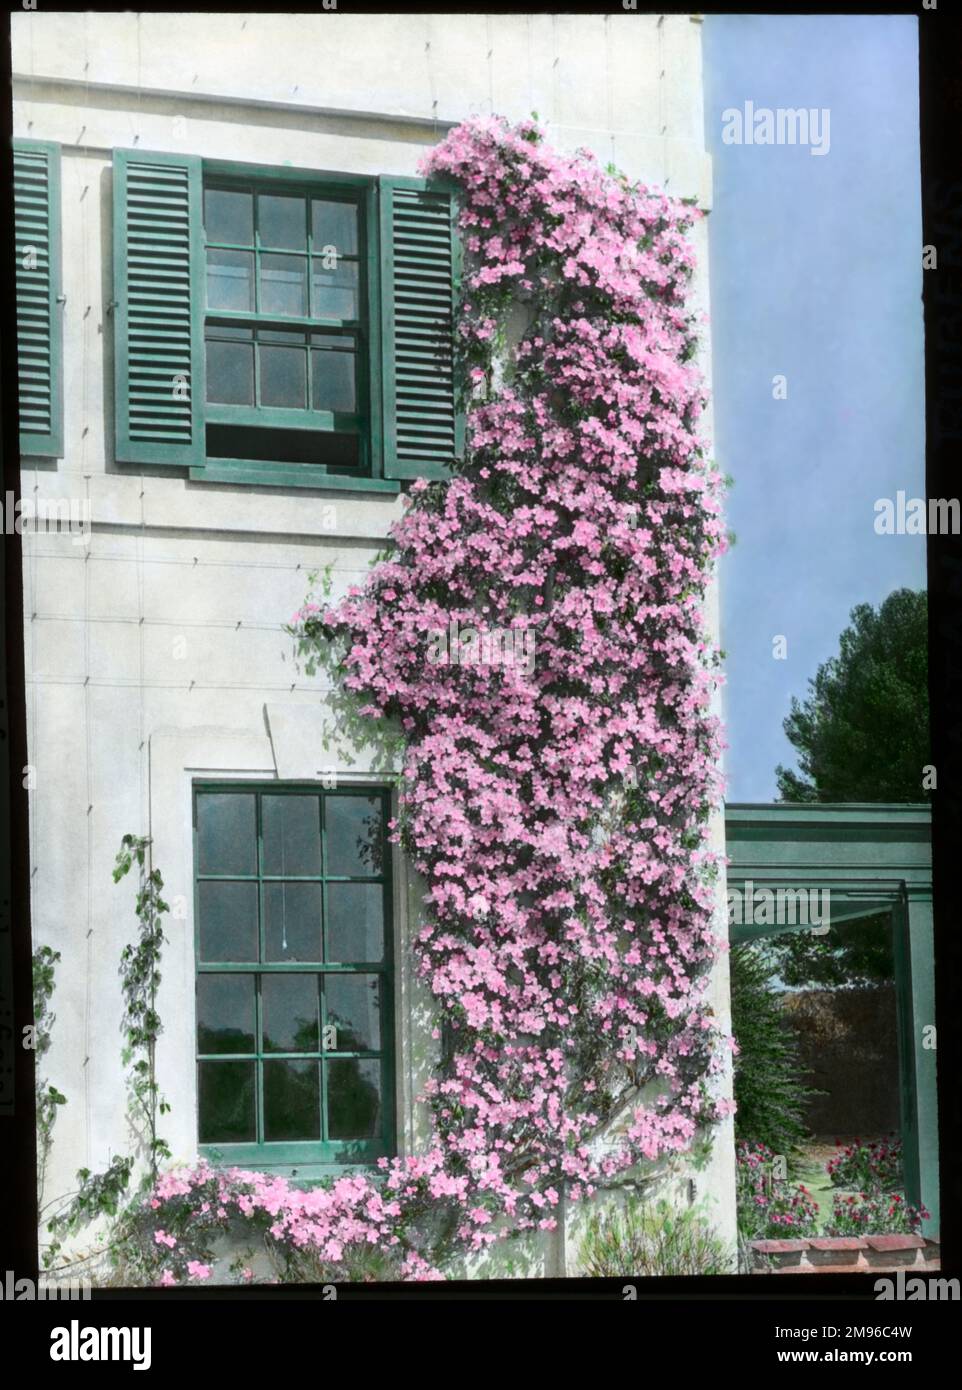 Clematis Montana Rubens, a hardy climbing plant of the buttercup family Ranunculaceae, with pink flowers.   Seen here growing up the side of a house, contrasting nicely with the white walls and green shutters. Stock Photo